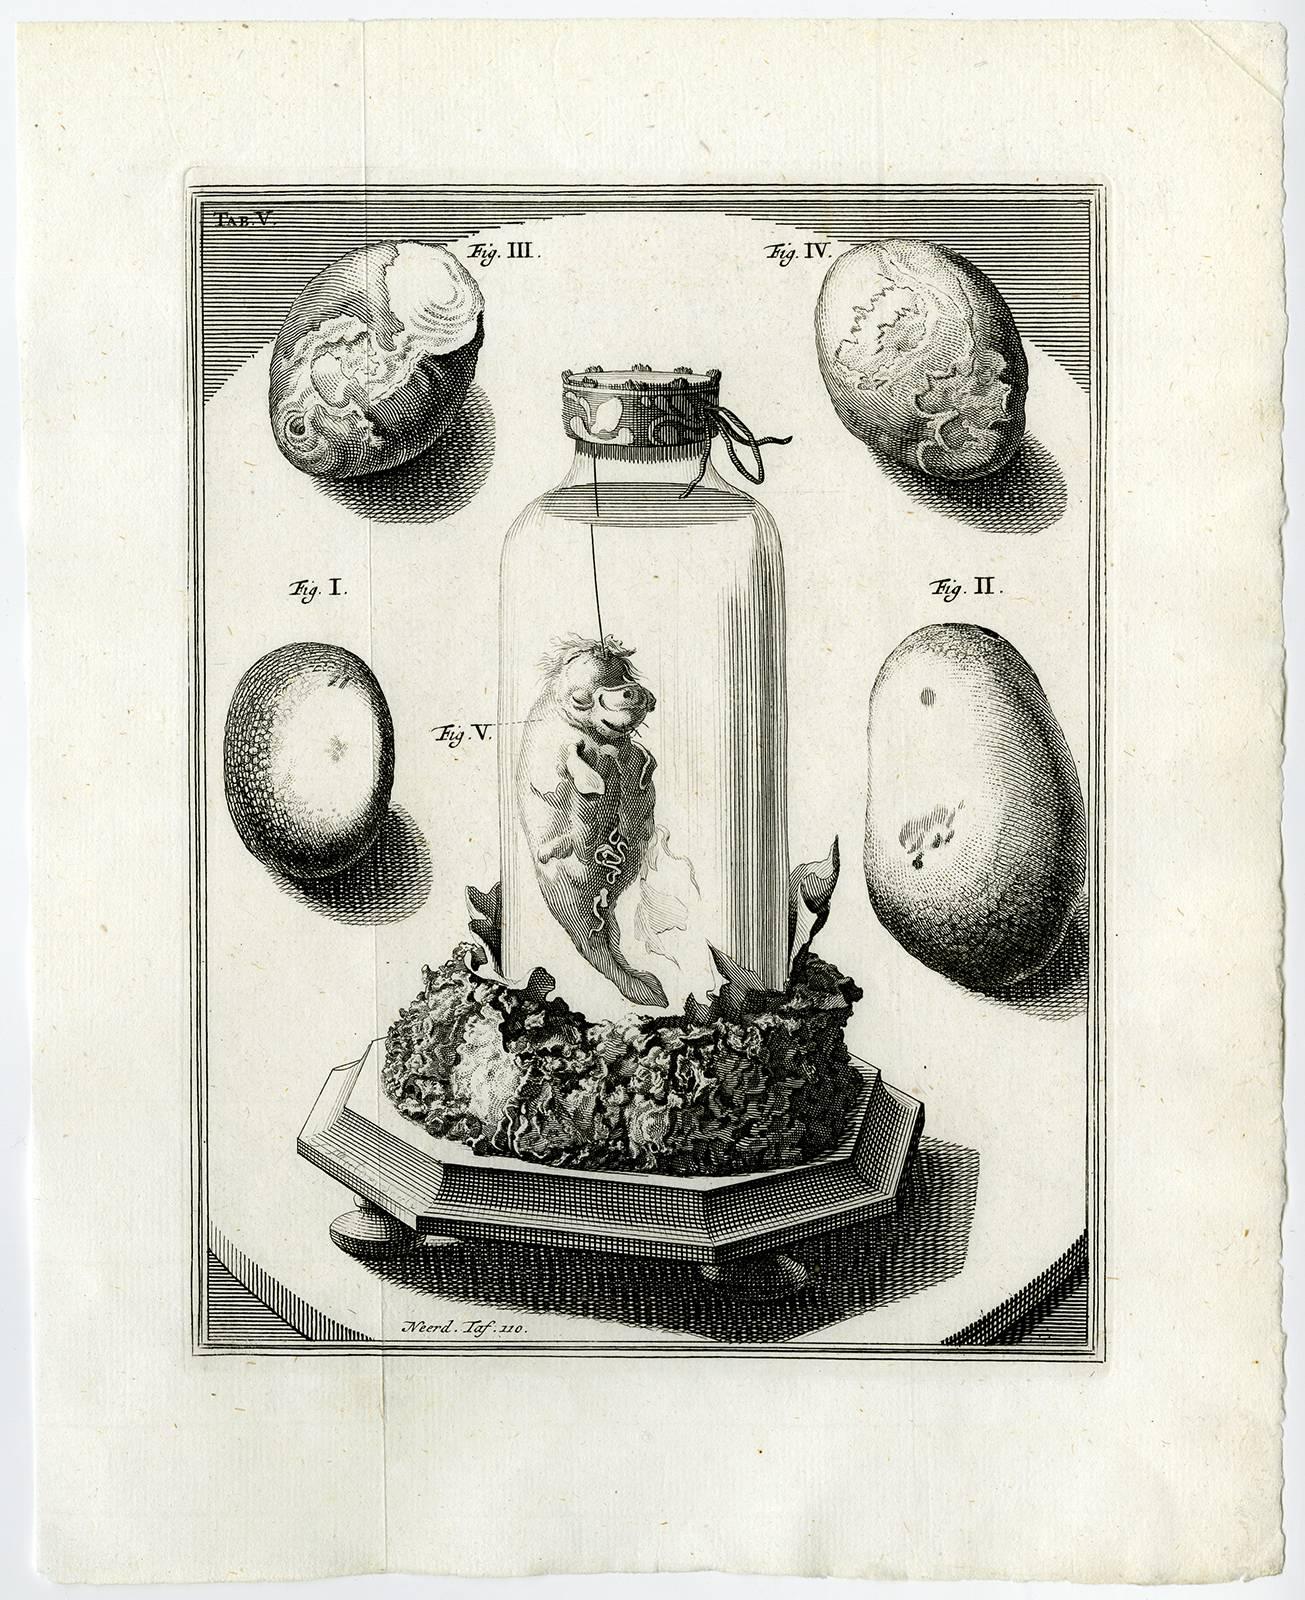 Cornelis Huijberts Print - Tab. V.' - Fig. 1-2: two stones (gall or kidney) [...].